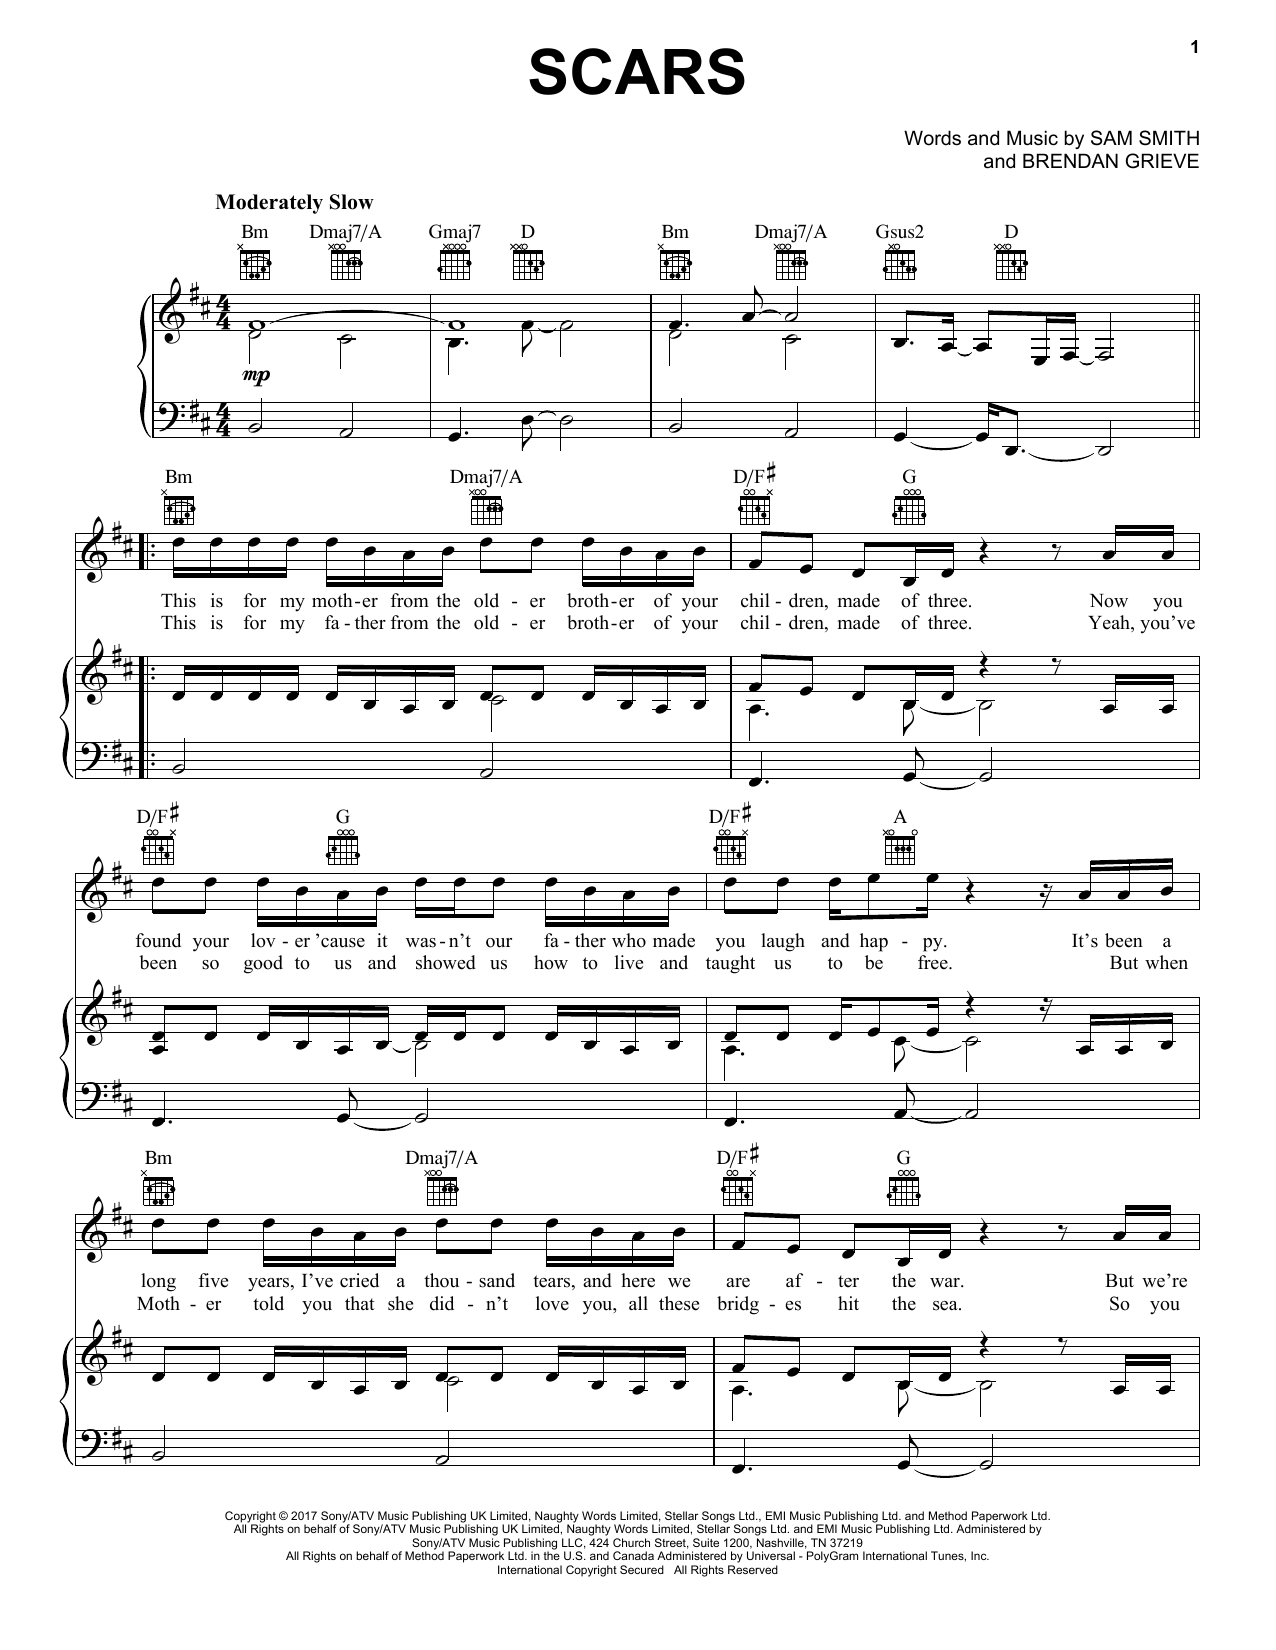 Download Sam Smith Scars Sheet Music